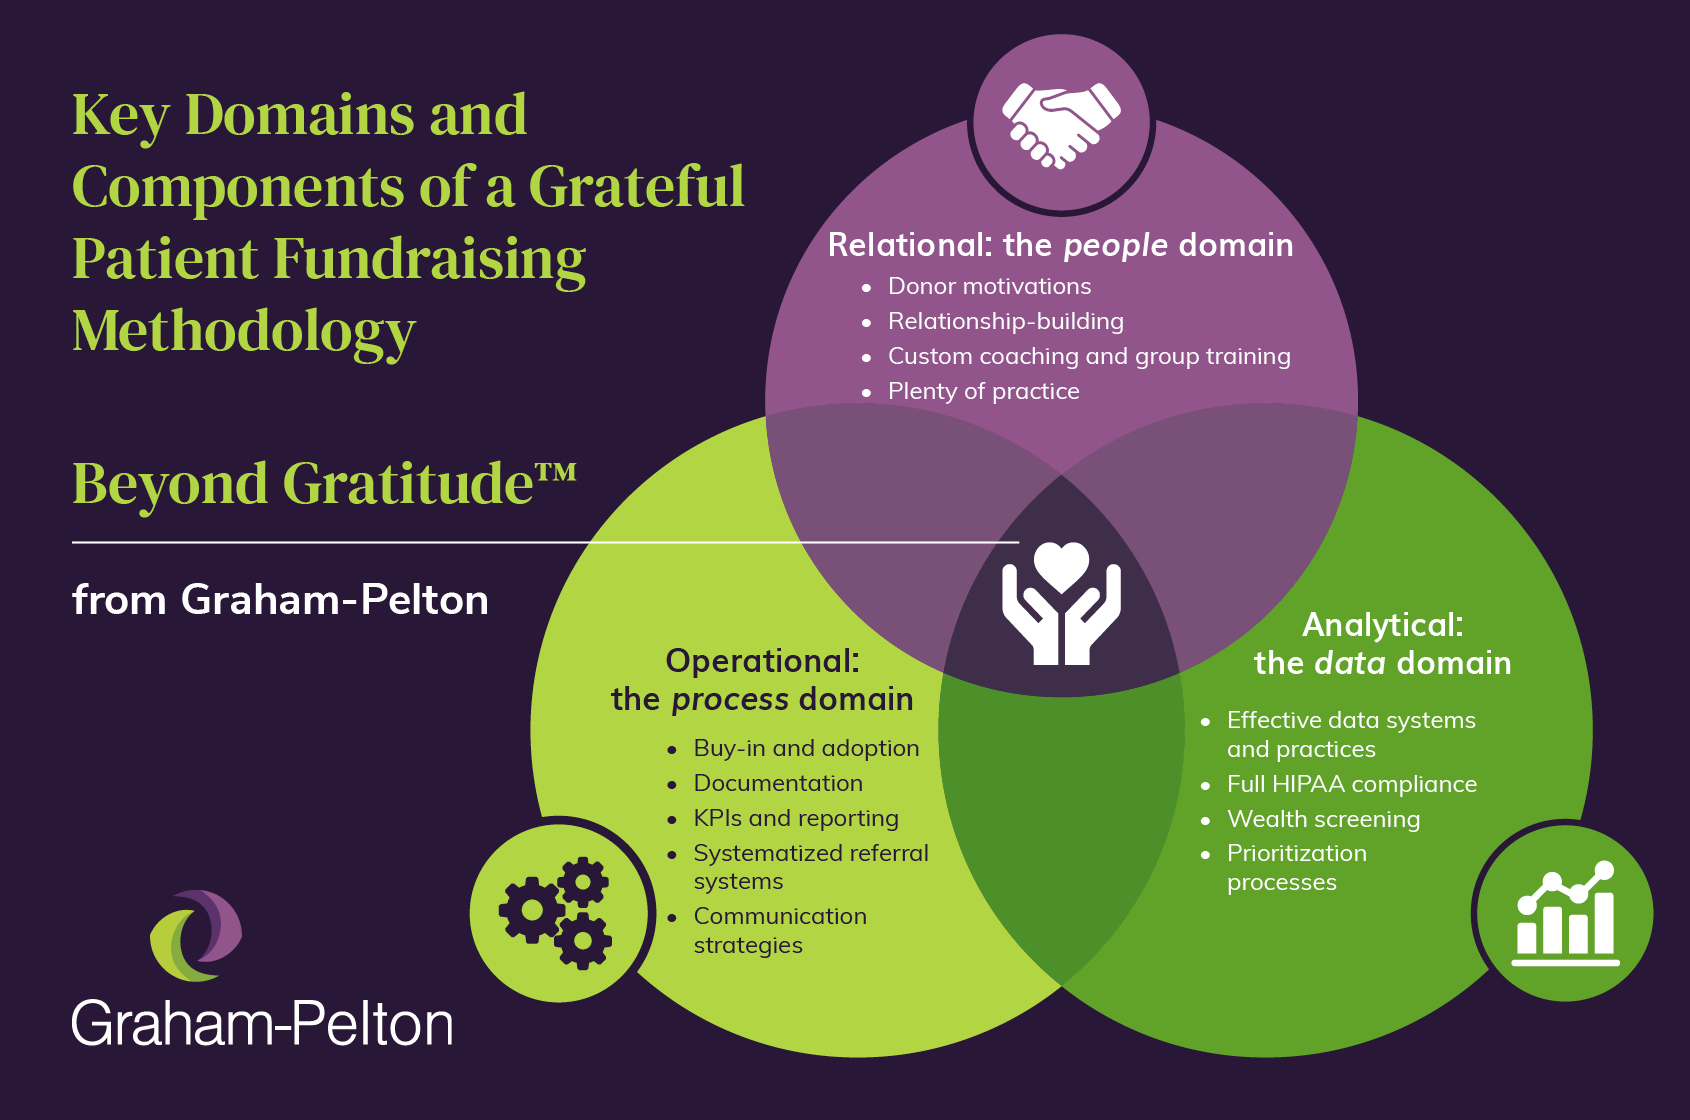 This graphic illustrates the key domains of Graham-Pelton's Beyond Gratitude grateful patient program methodology, explained in the text below.